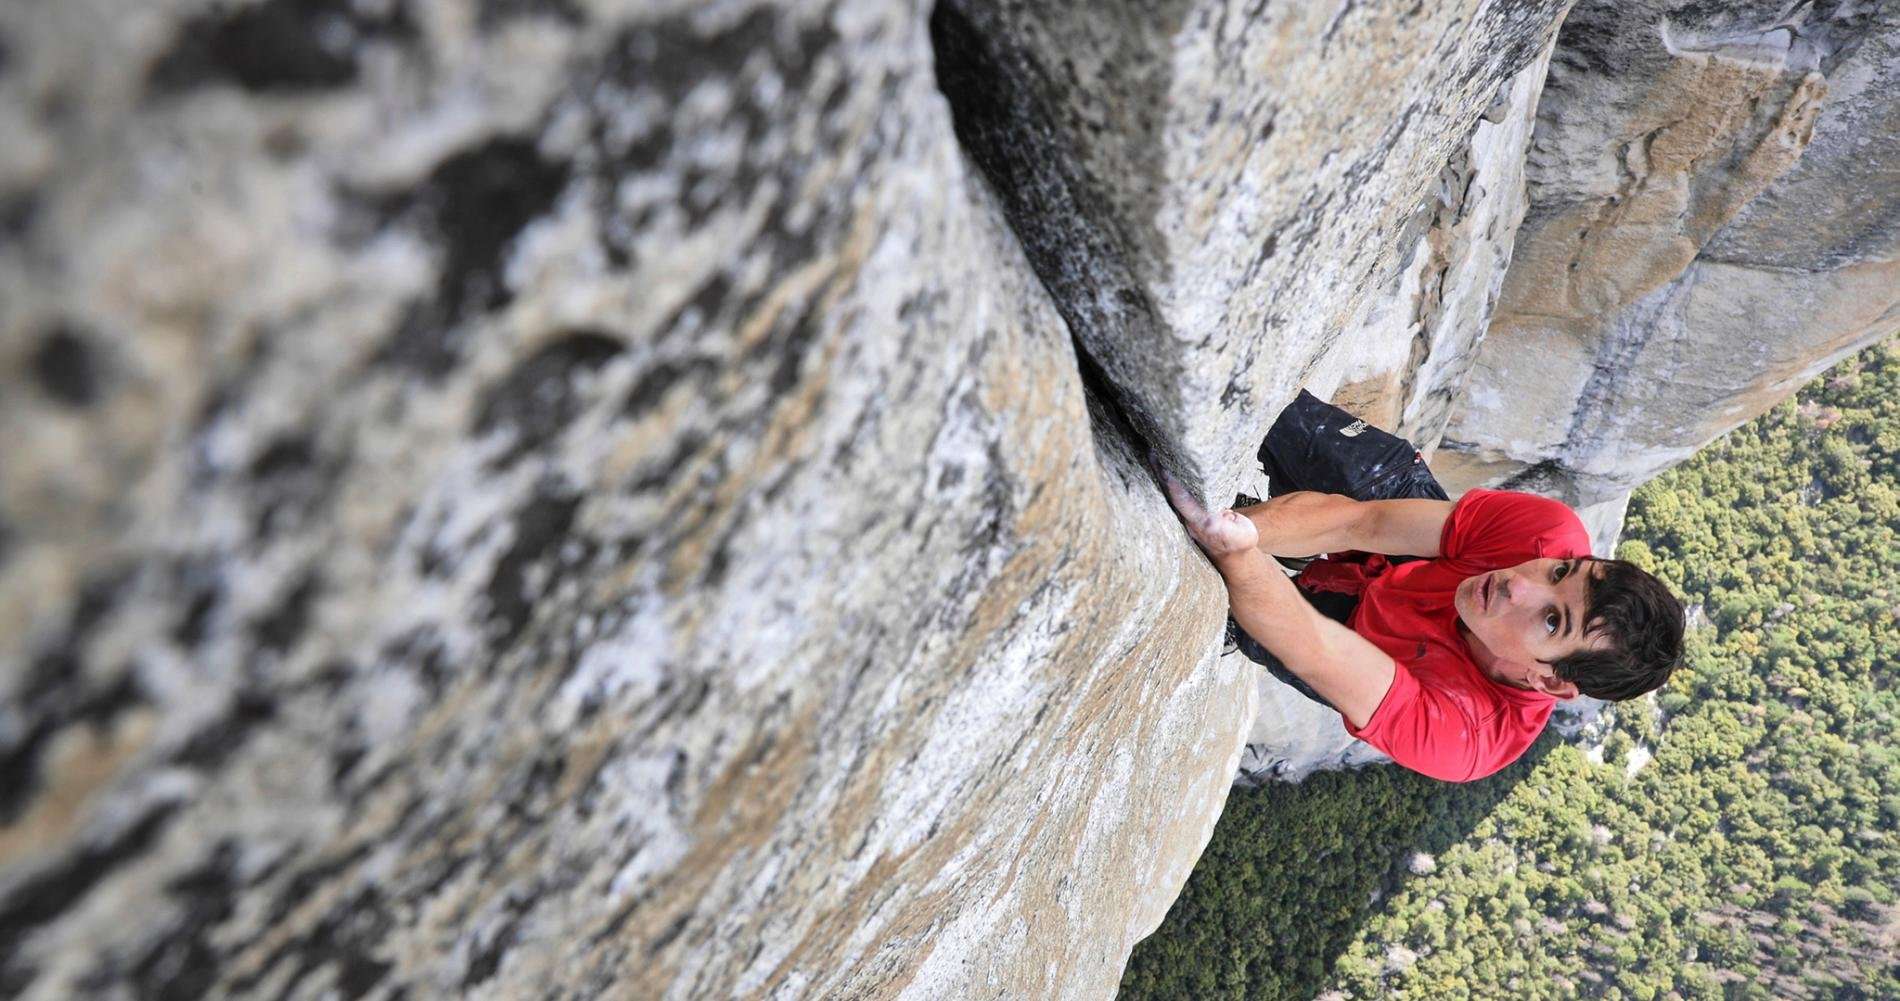 image for Exclusive: Climber Completes the Most Dangerous Rope-Free Ascent Ever